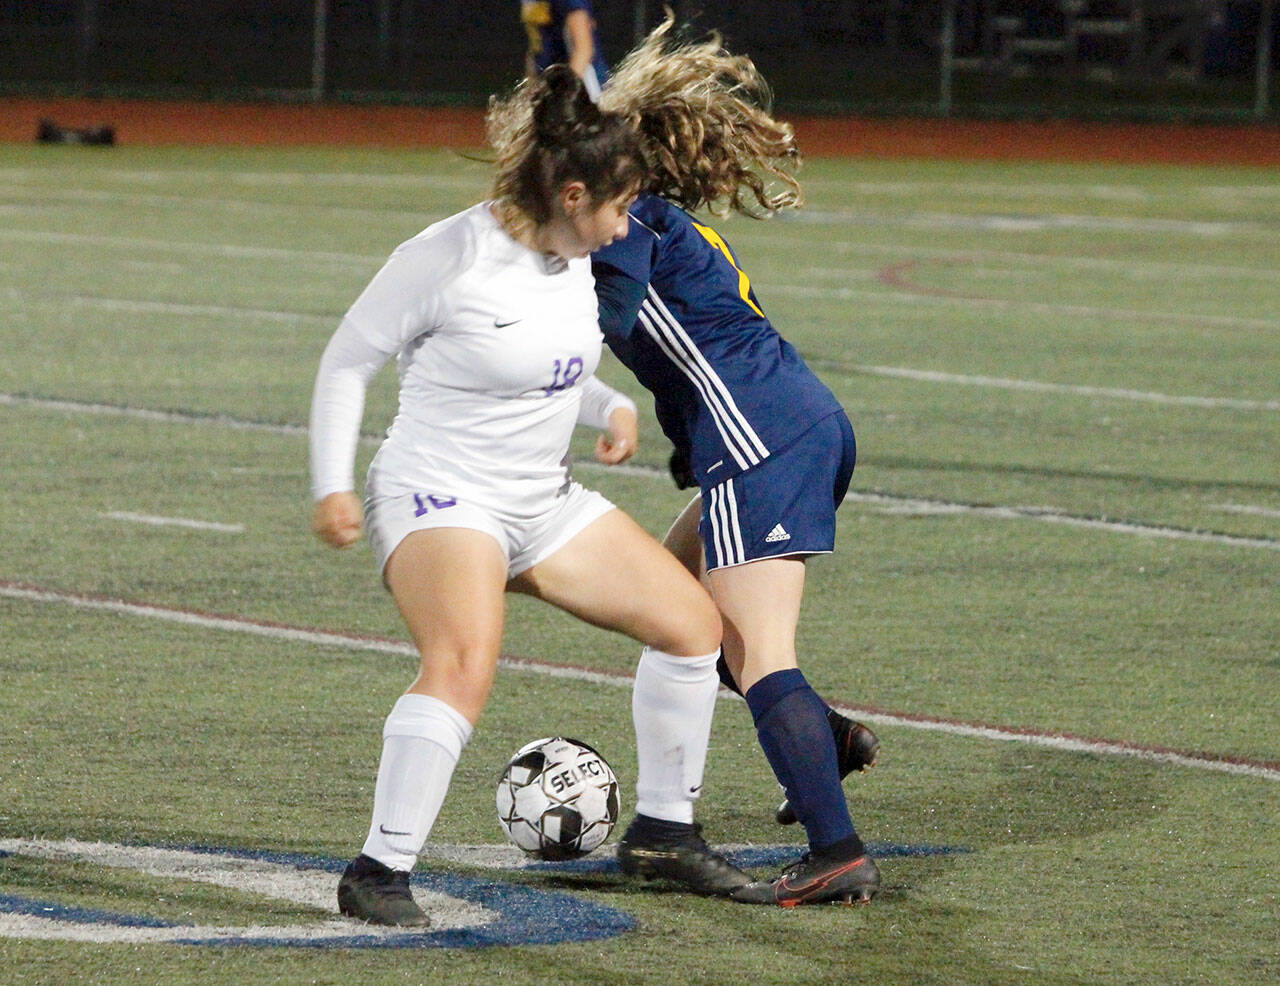 Sequim’s Samantha Gonzalez, left, gets tangled up with Bainbridge’s Gabby Weis at midfield during a 1-0 loss to the Spartans on Thursday. (Mark Krulish/Kitsap News Group)